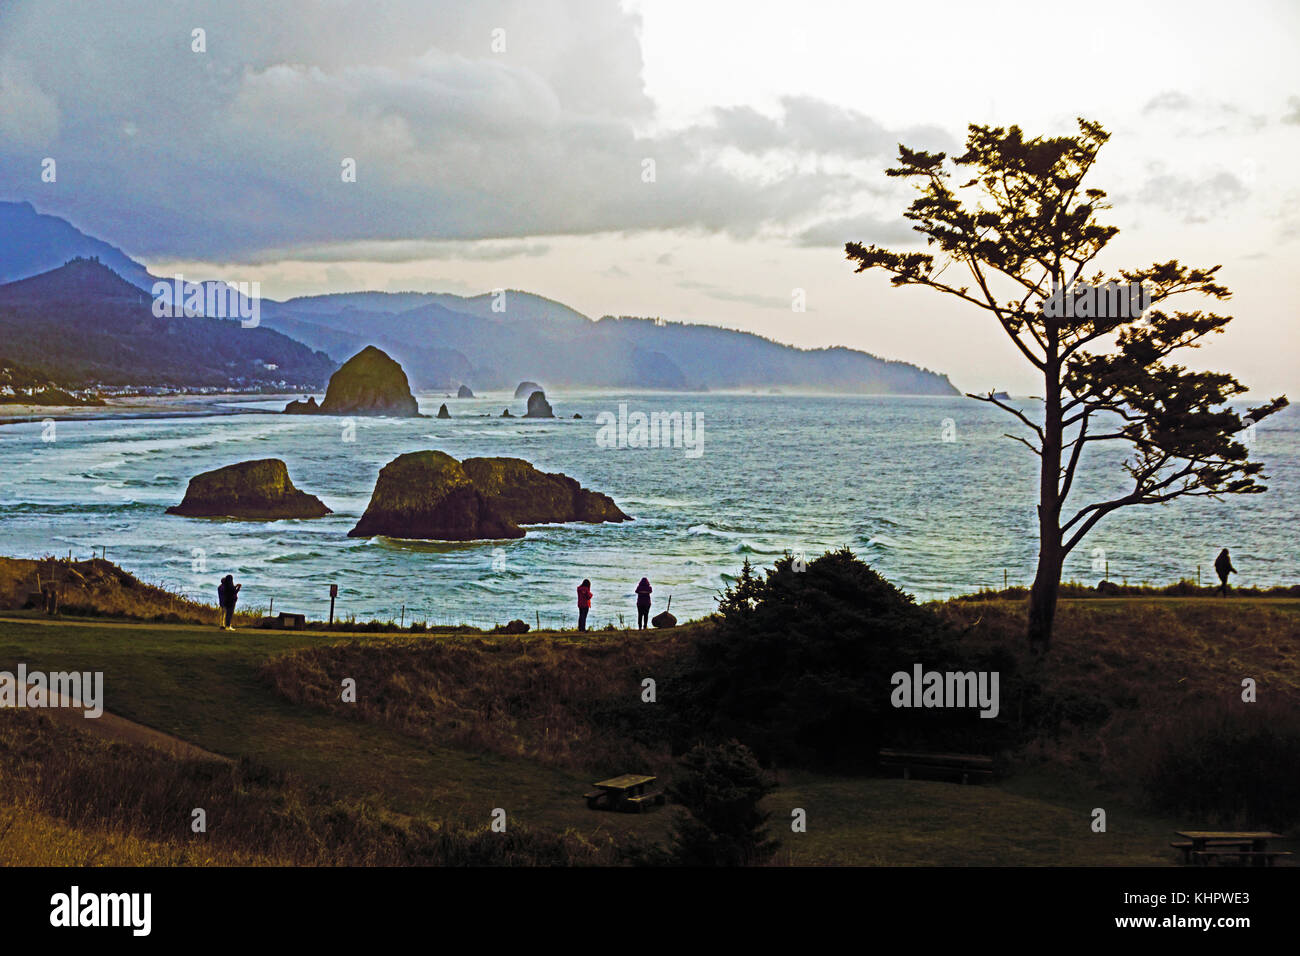 Oregon coast at Cannon Beach at dusk viewed from Ecola State Park. Stock Photo